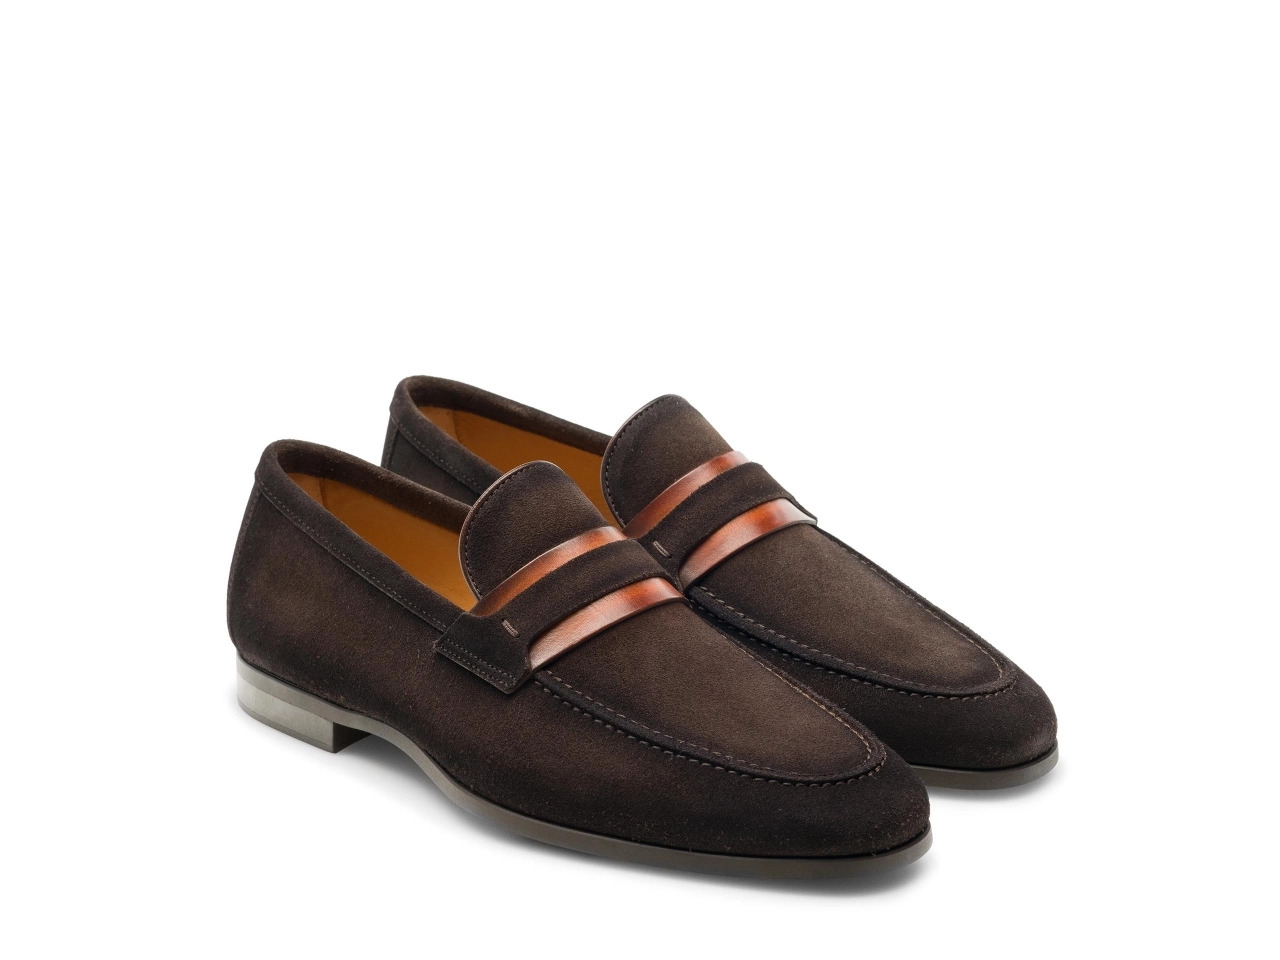 Magnanni suede loafers